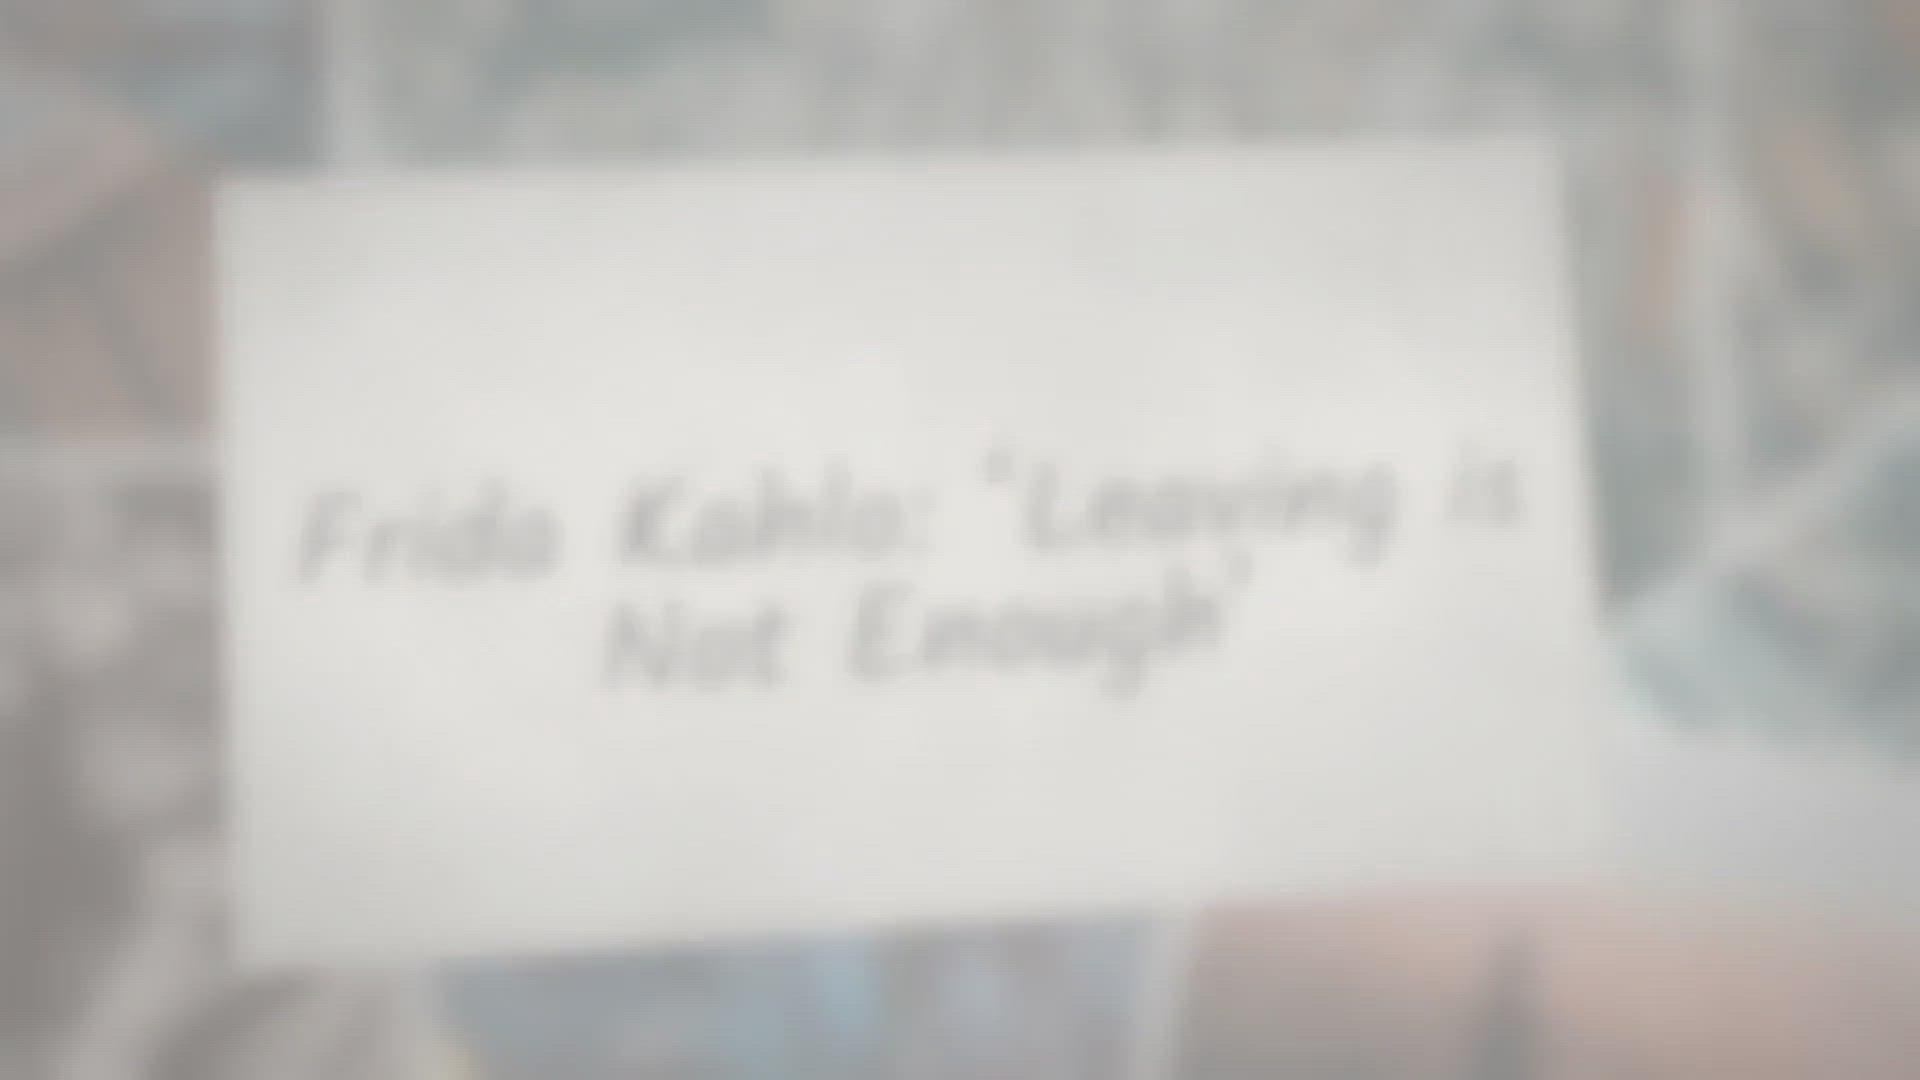 'Video thumbnail for Frida Kahlo: ‘Leaving is Not Enough’'